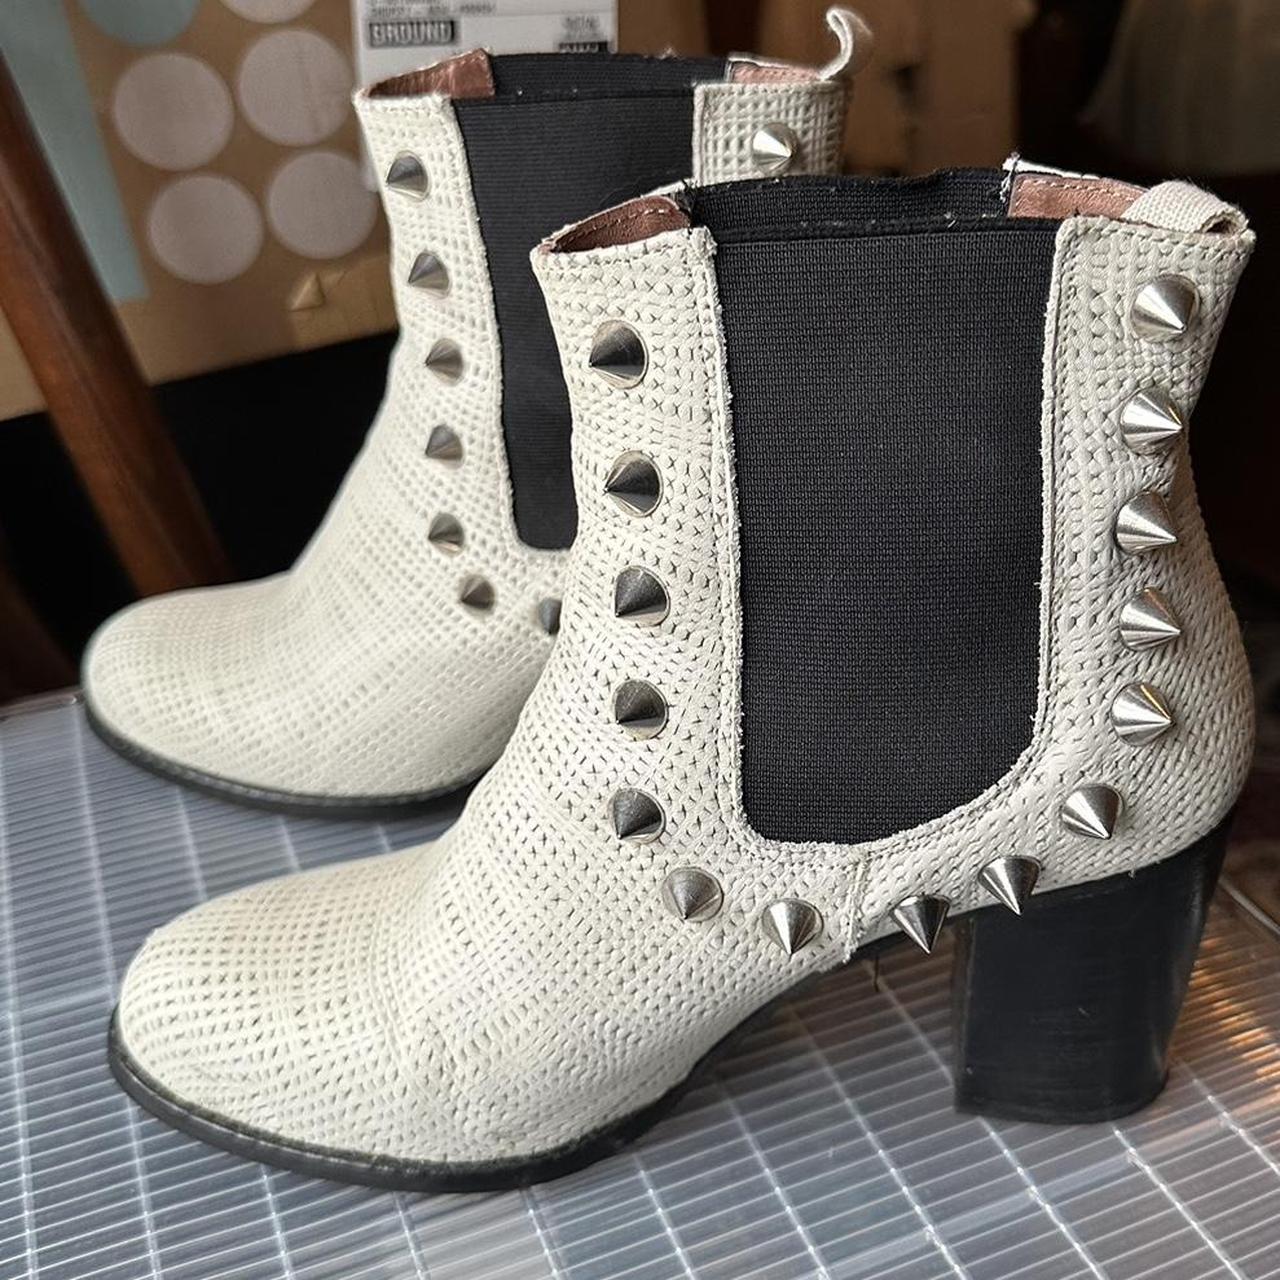 TBA off white spiked boots. 3 inch heels. Leather... - Depop